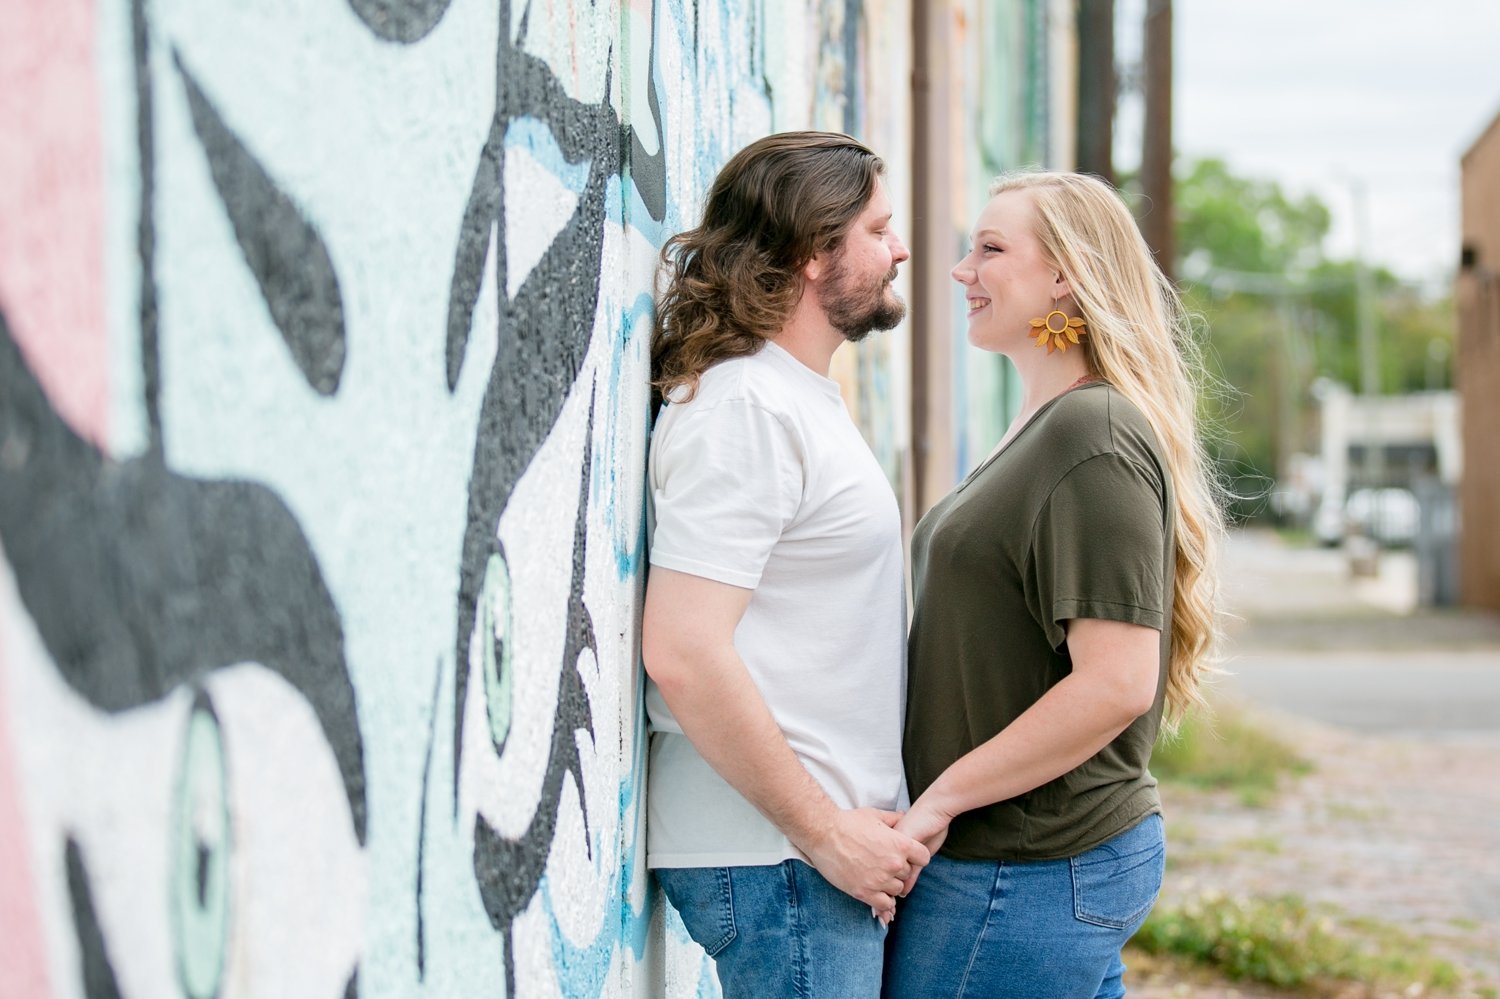 Downtown-Tampa-Heights-Engagement-Session-Caitlin-and-Sal 2.jpg